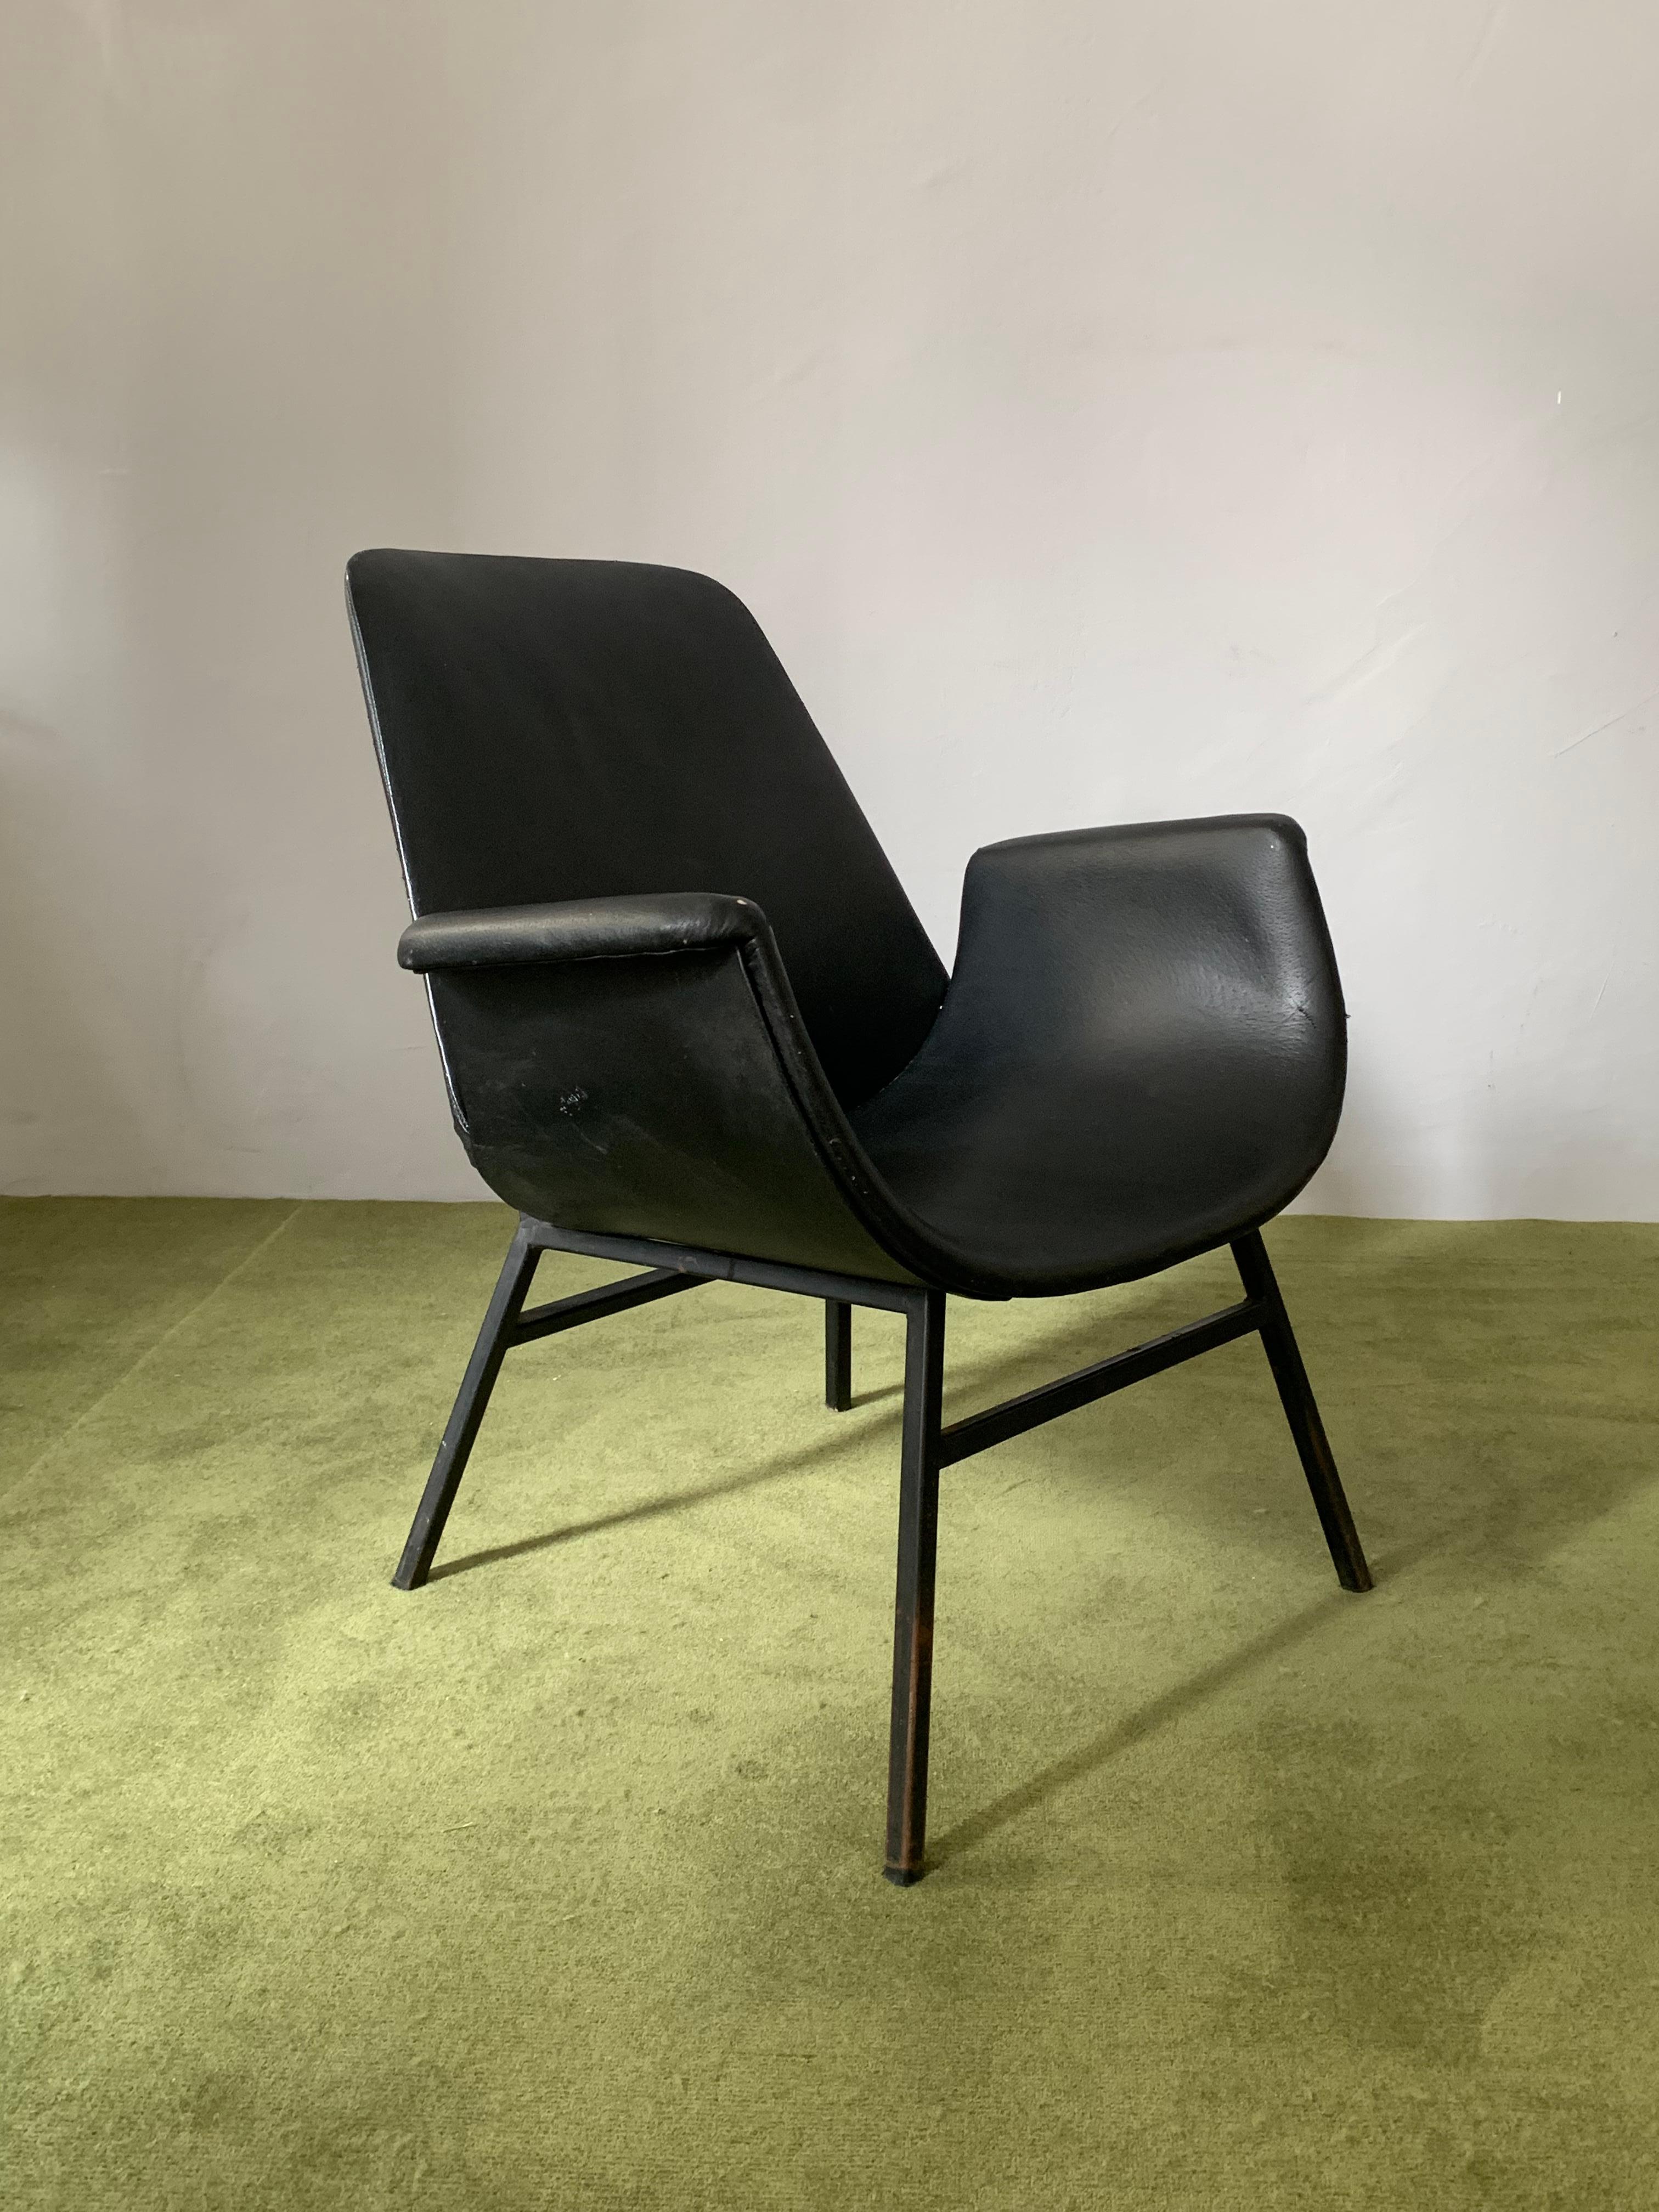 This lovely vintage armchair was produced in 1960s-1970s Yugoslavia, made after the design of Alvin Lustig, design pioneer for Paramount Furniture in the 1950s. 
The chair is visually striking and structurally very solid, with an angular metal frame